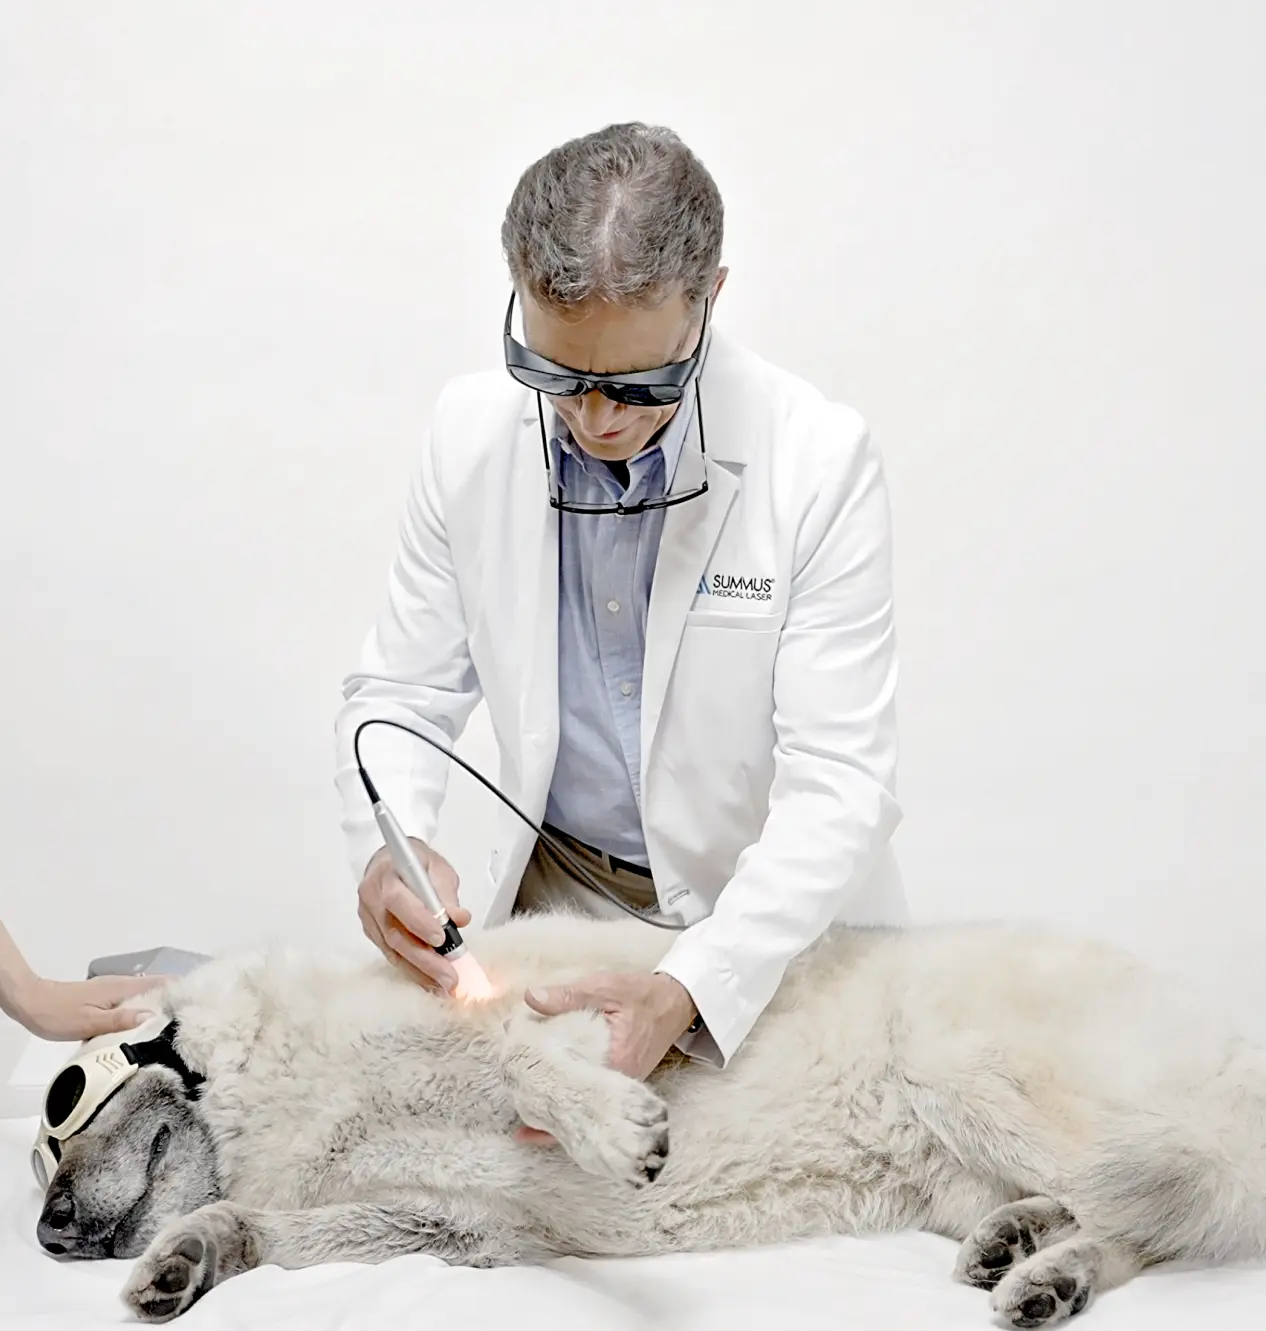 Vet; summus doctor providing laser therapy treatment to a dog laying on it's side on the table; both parties are wearing protective goggles;